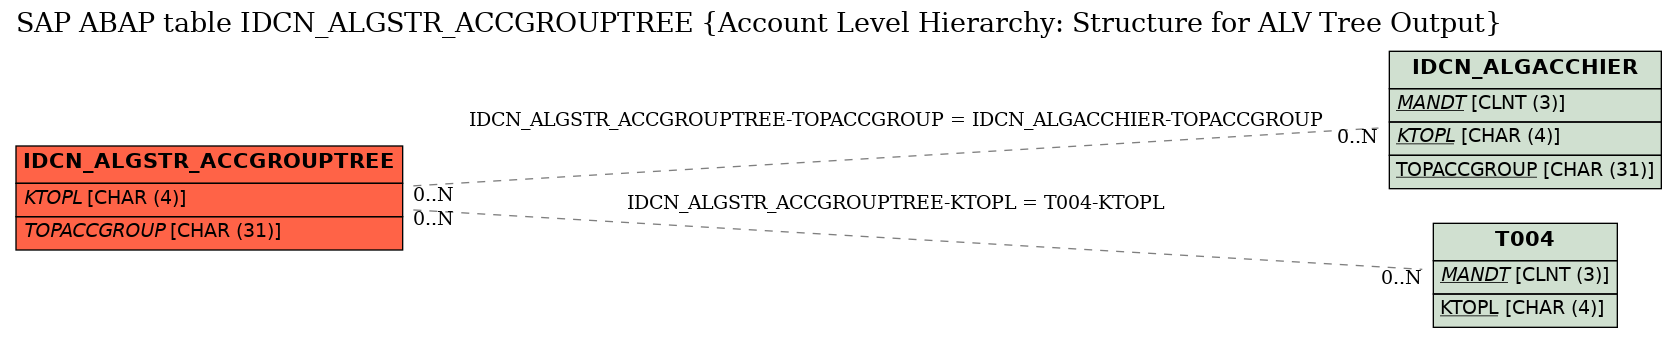 E-R Diagram for table IDCN_ALGSTR_ACCGROUPTREE (Account Level Hierarchy: Structure for ALV Tree Output)